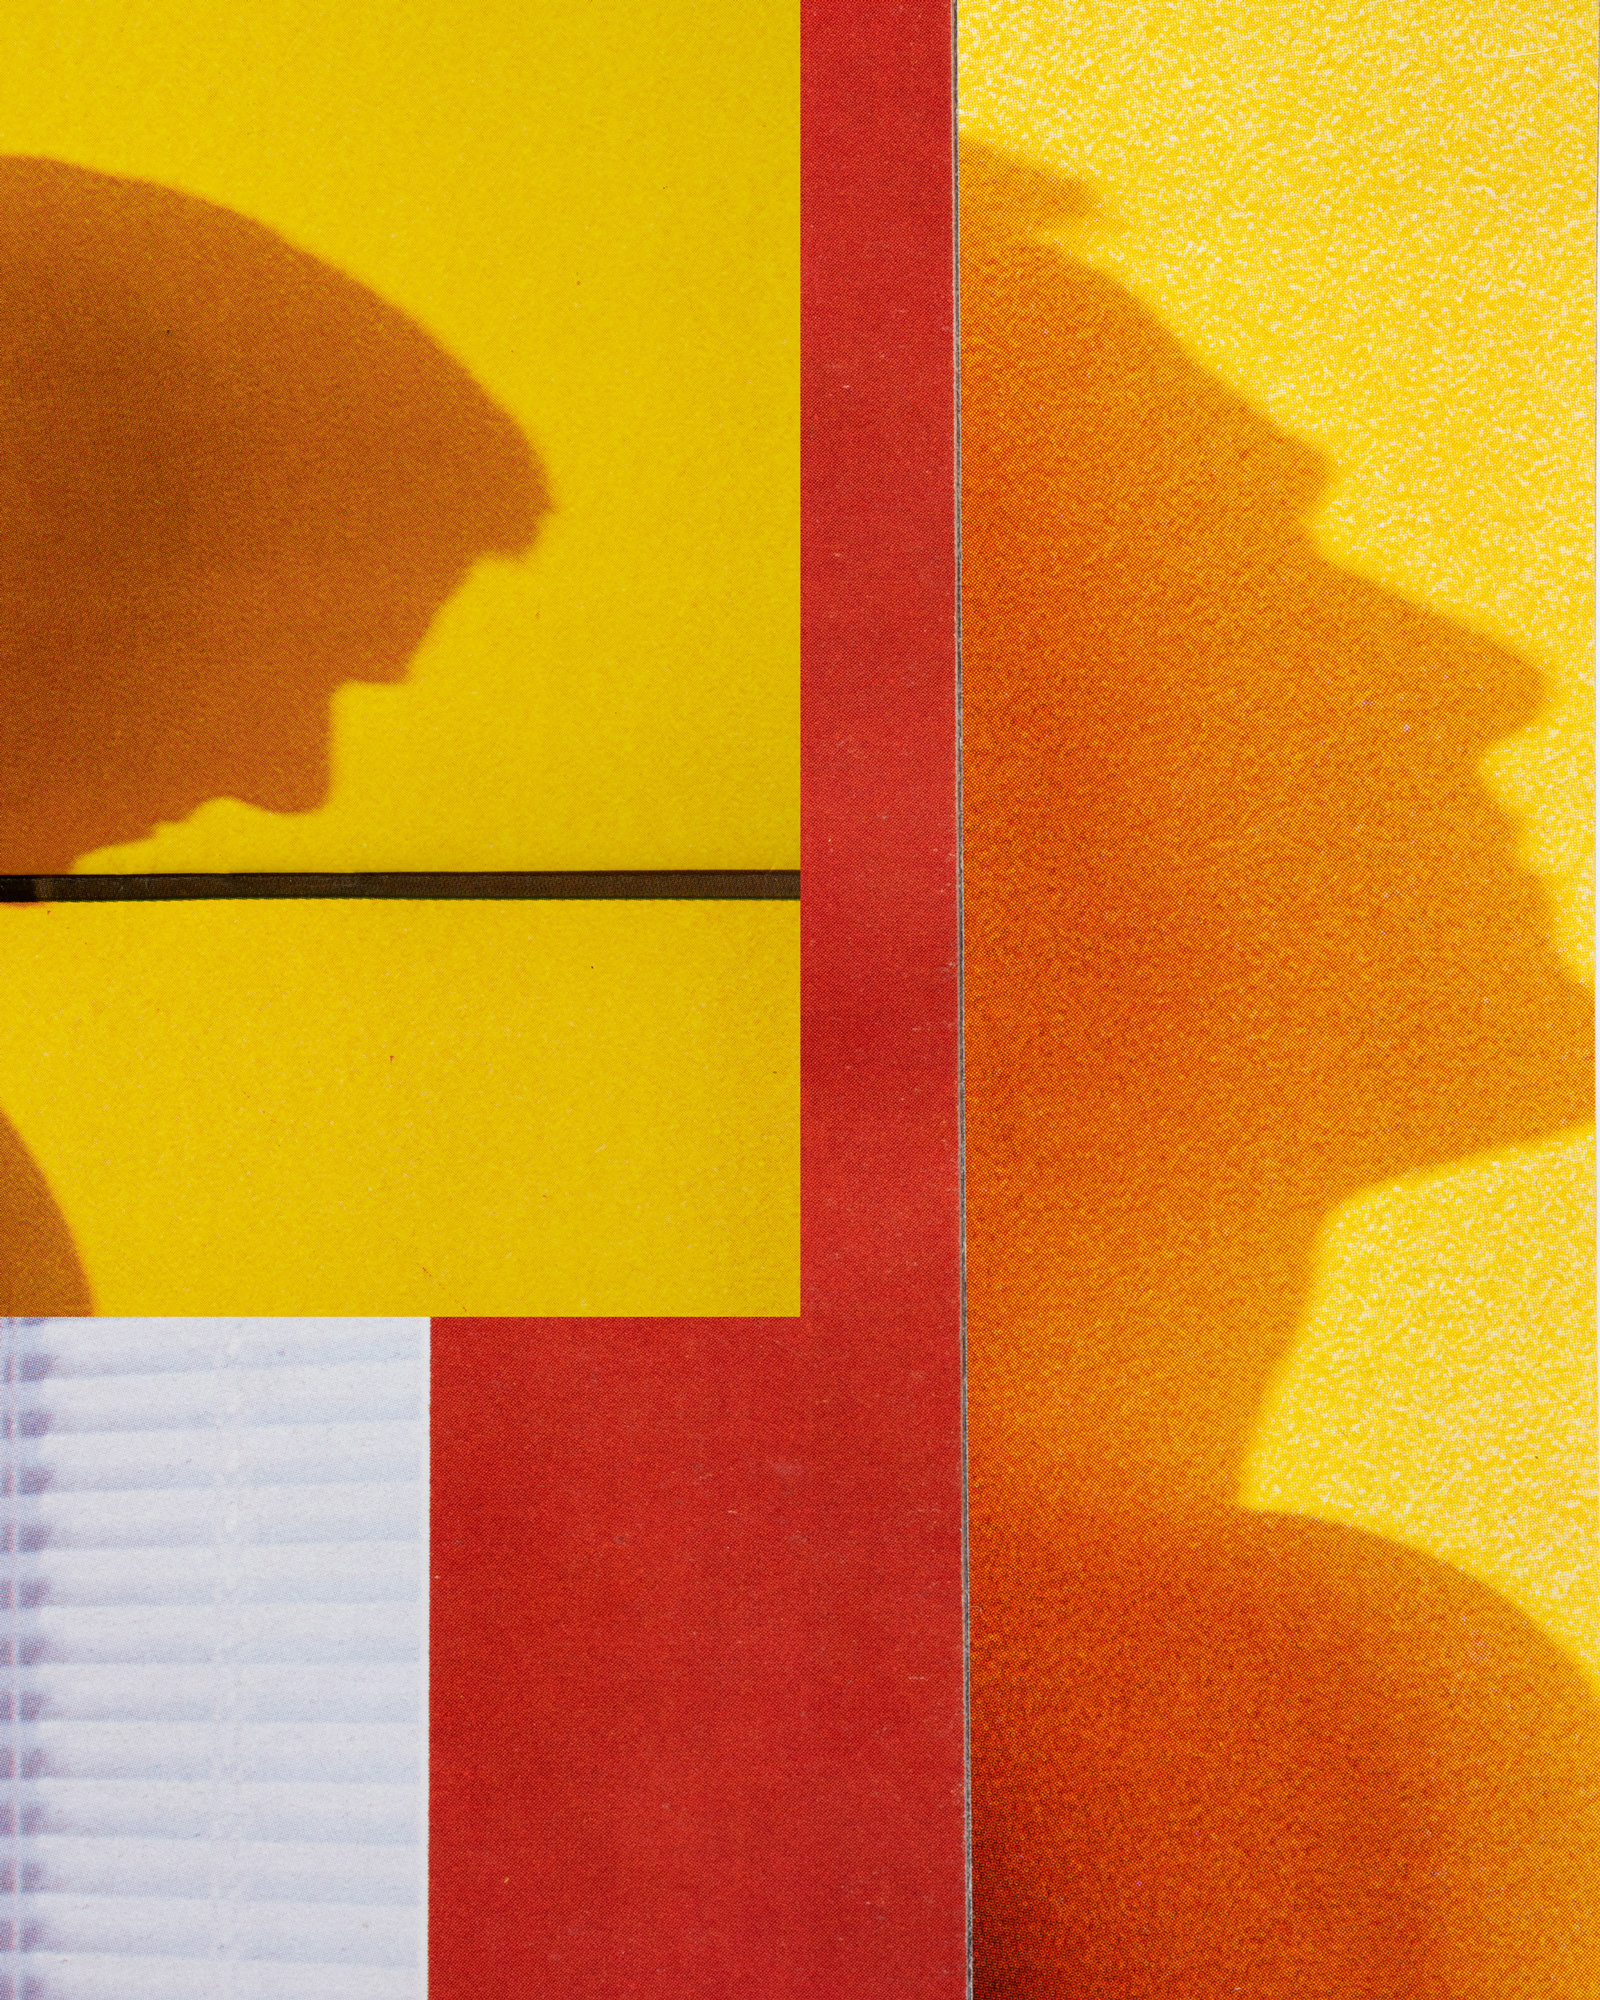 Image description: Collage of silhouettes of a man’s face against a yellow background. Art by Pacifico Silano.